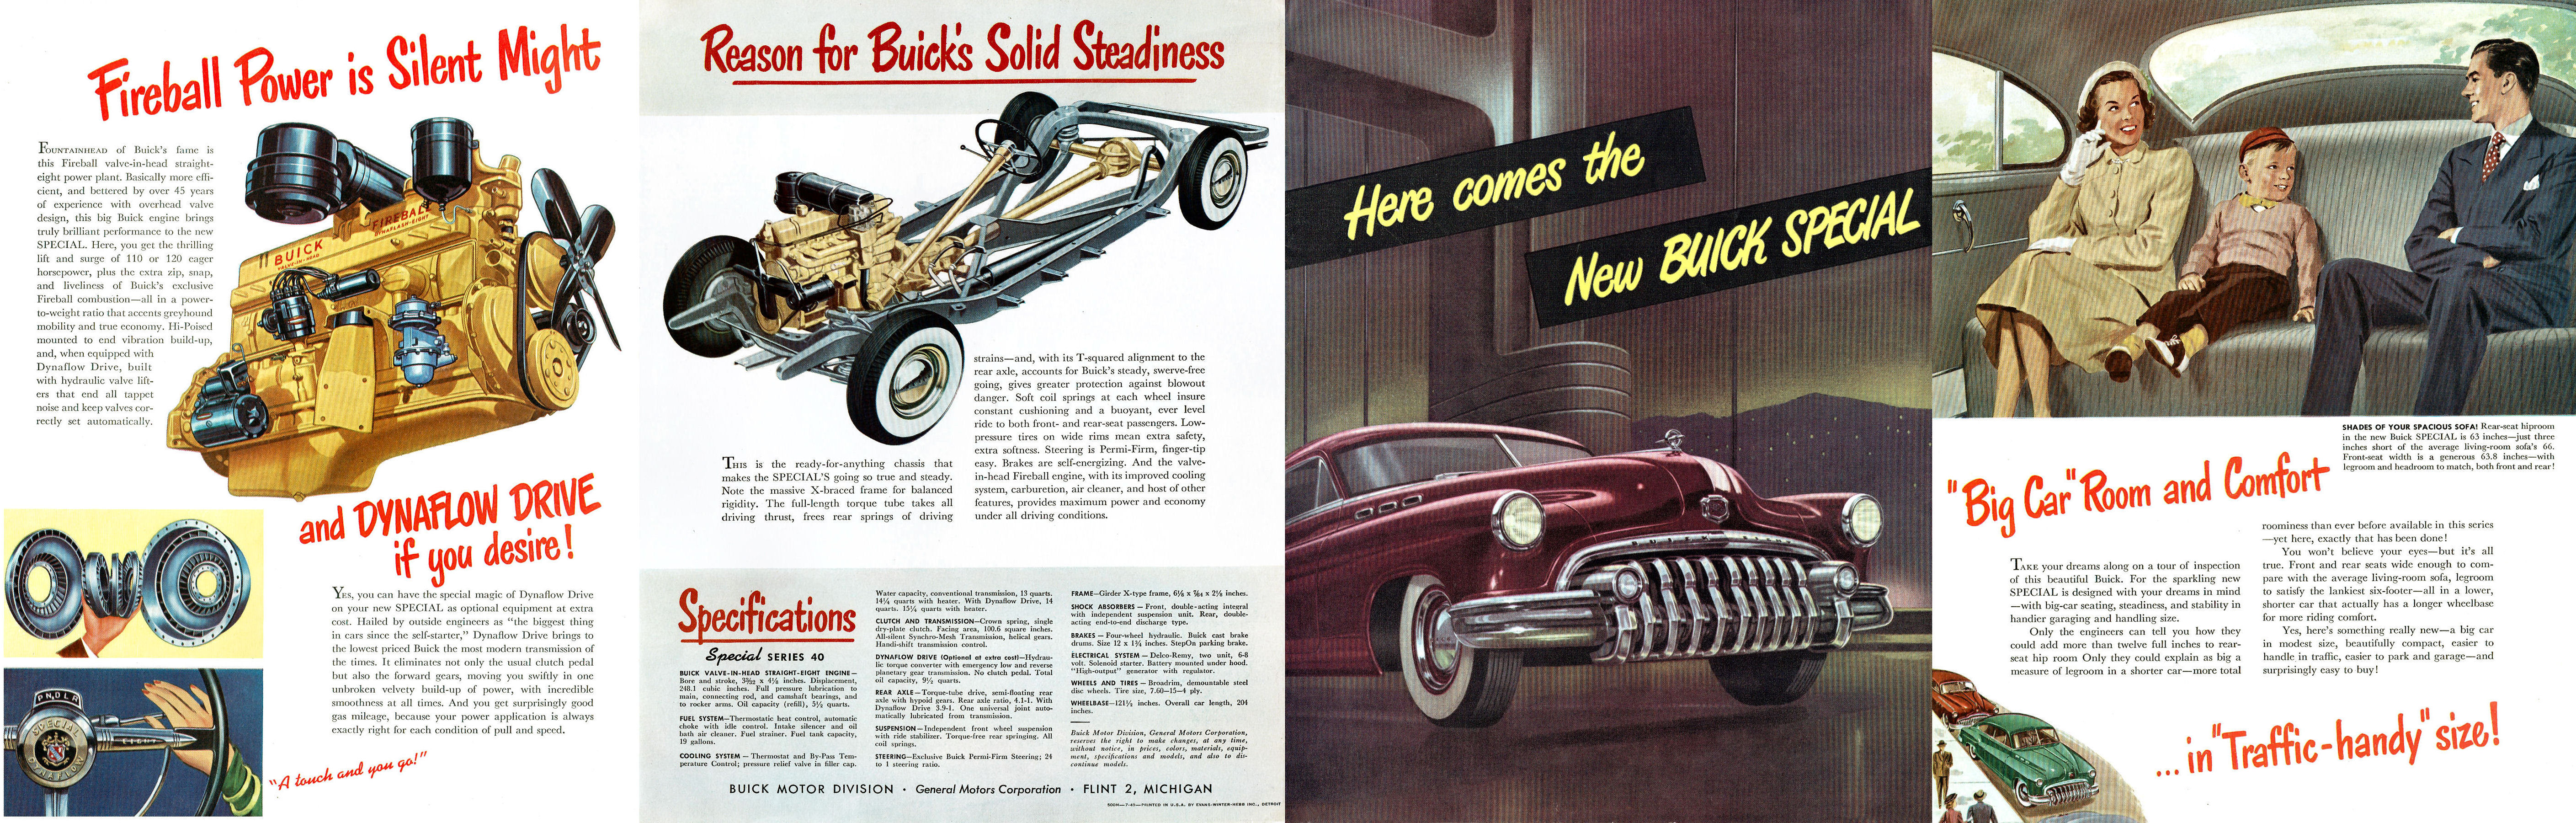 1950 Buick Special Folder (TP).pdf-2023-11-23 10.49.17_Page_5